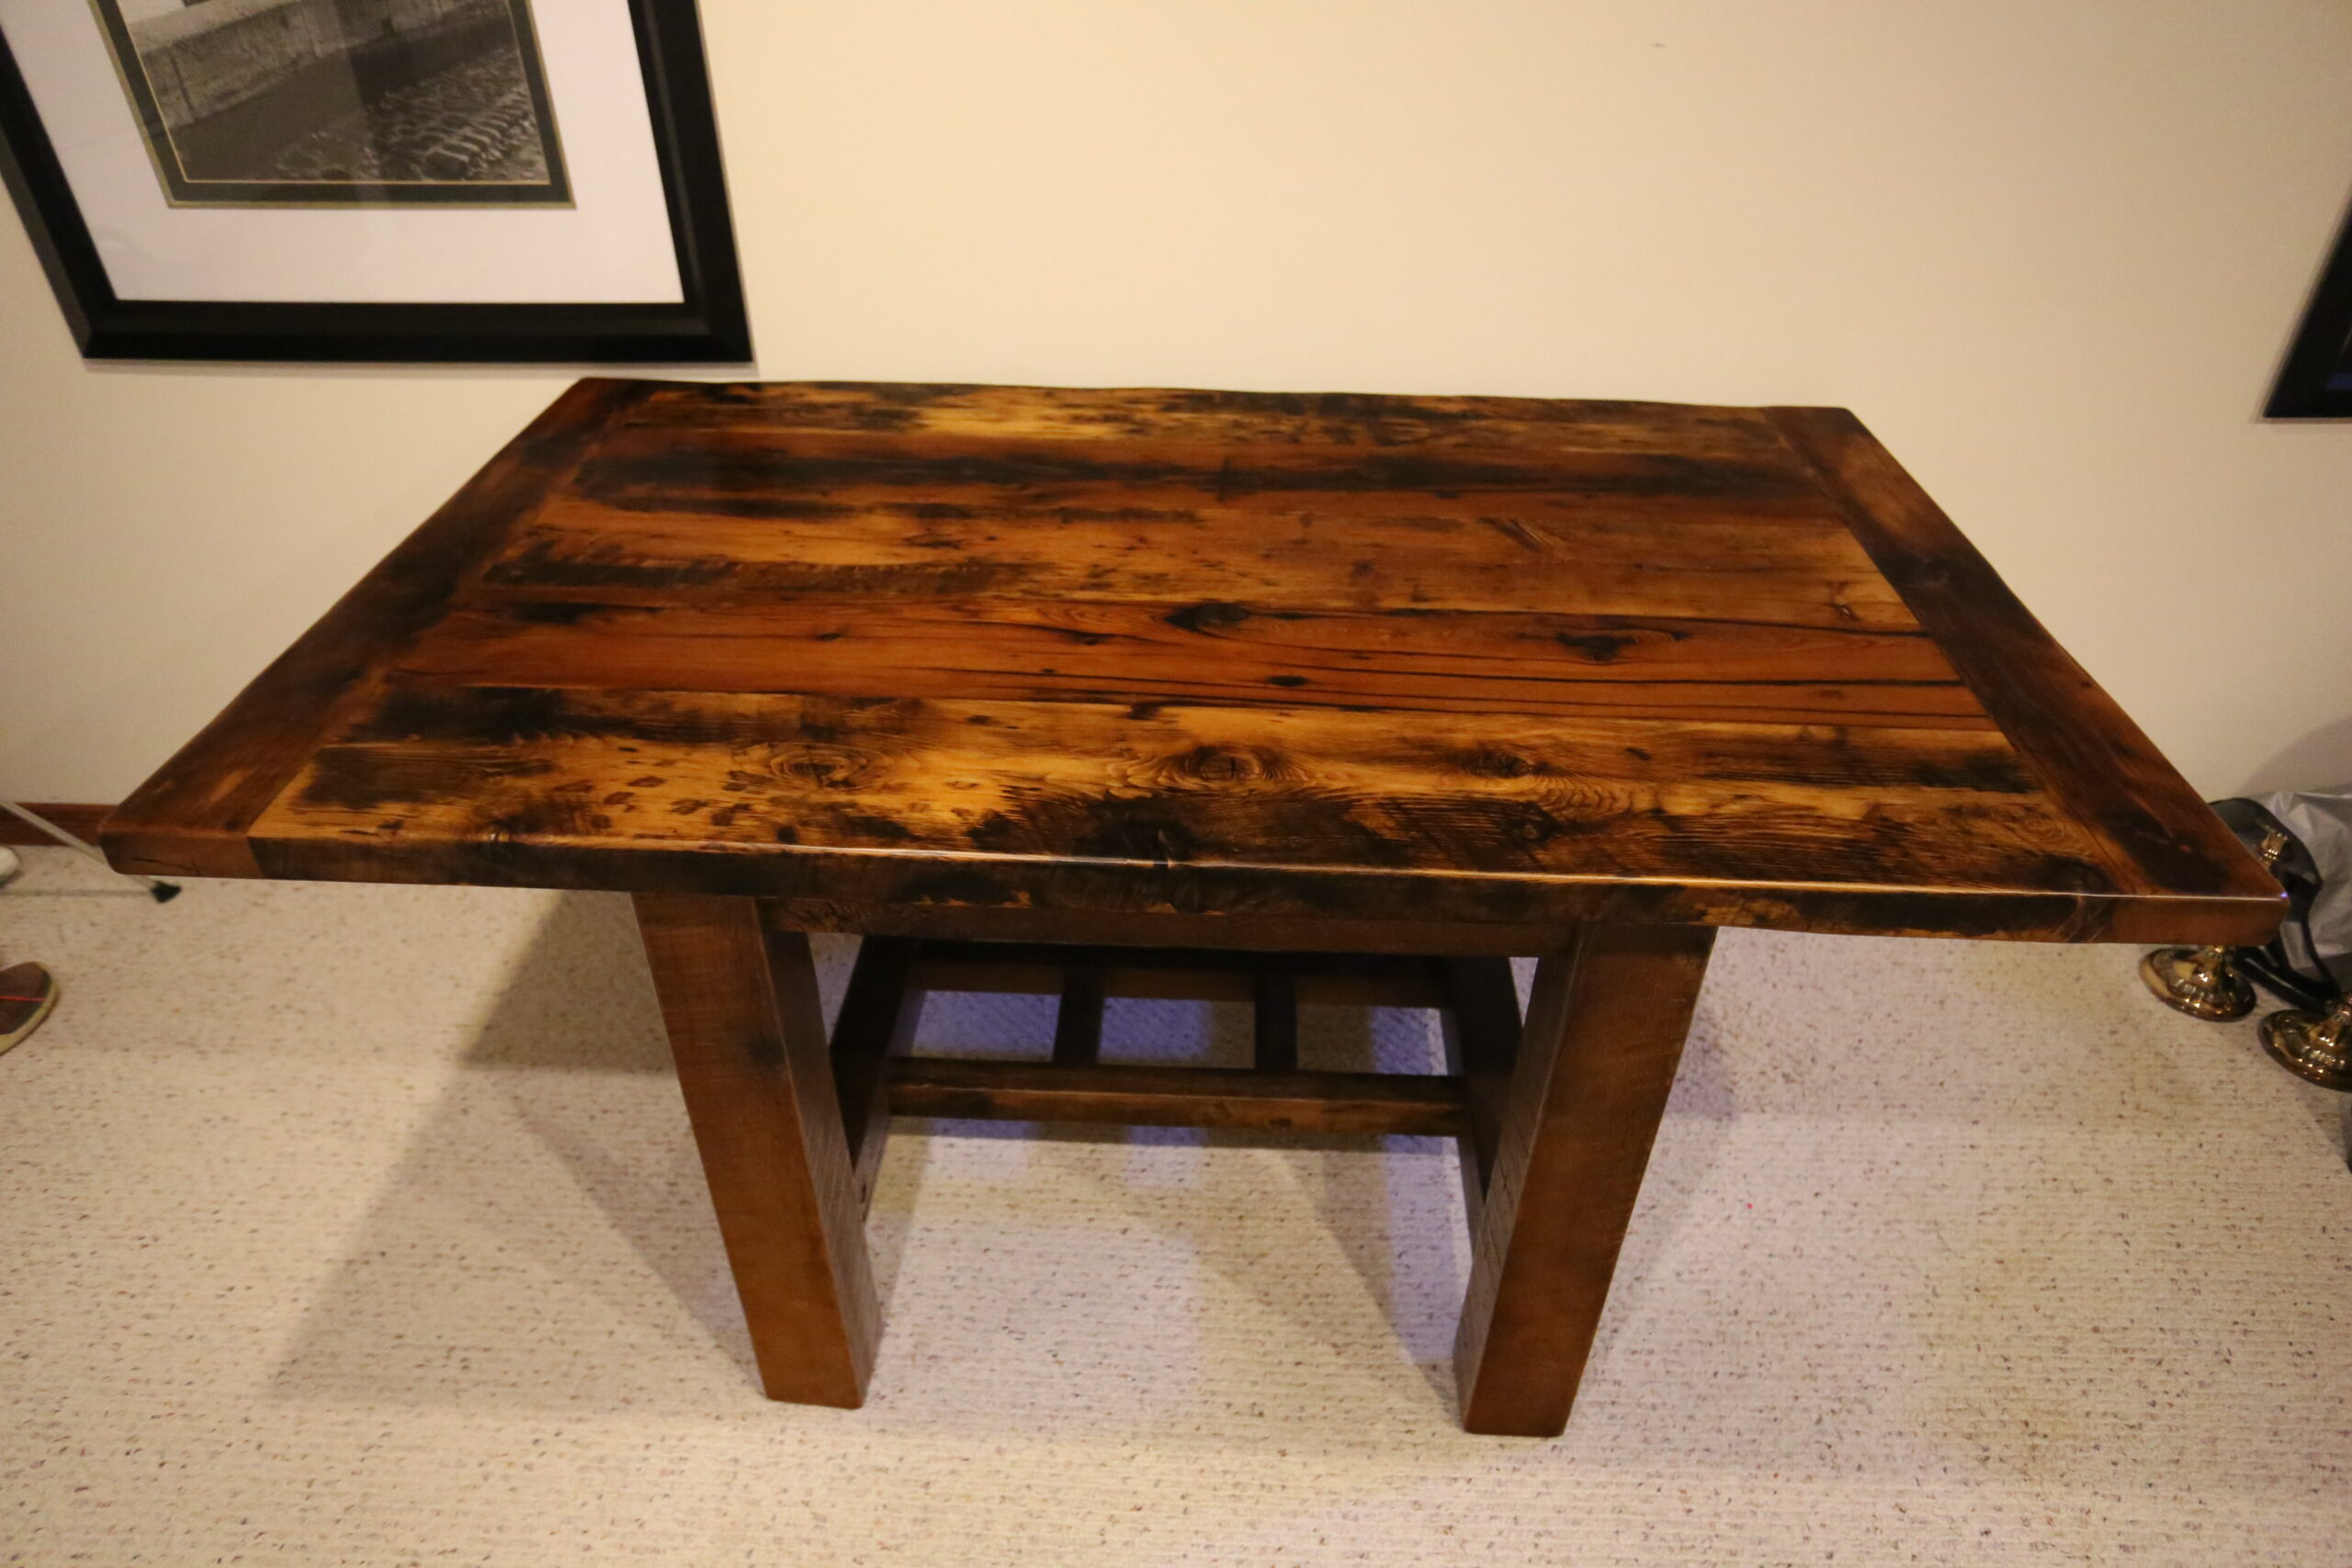 Project details: 5 ft Reclaimed Ontario Barnwood Desk we made for a Thornhill, Ontario home - 36" wide – Frame Base - Old Growth Hemlock Threshing Floor Construction – Bread edge Ends - Original edges & distressing maintained - Premium epoxy + satin polyurethane finish - www.table.ca